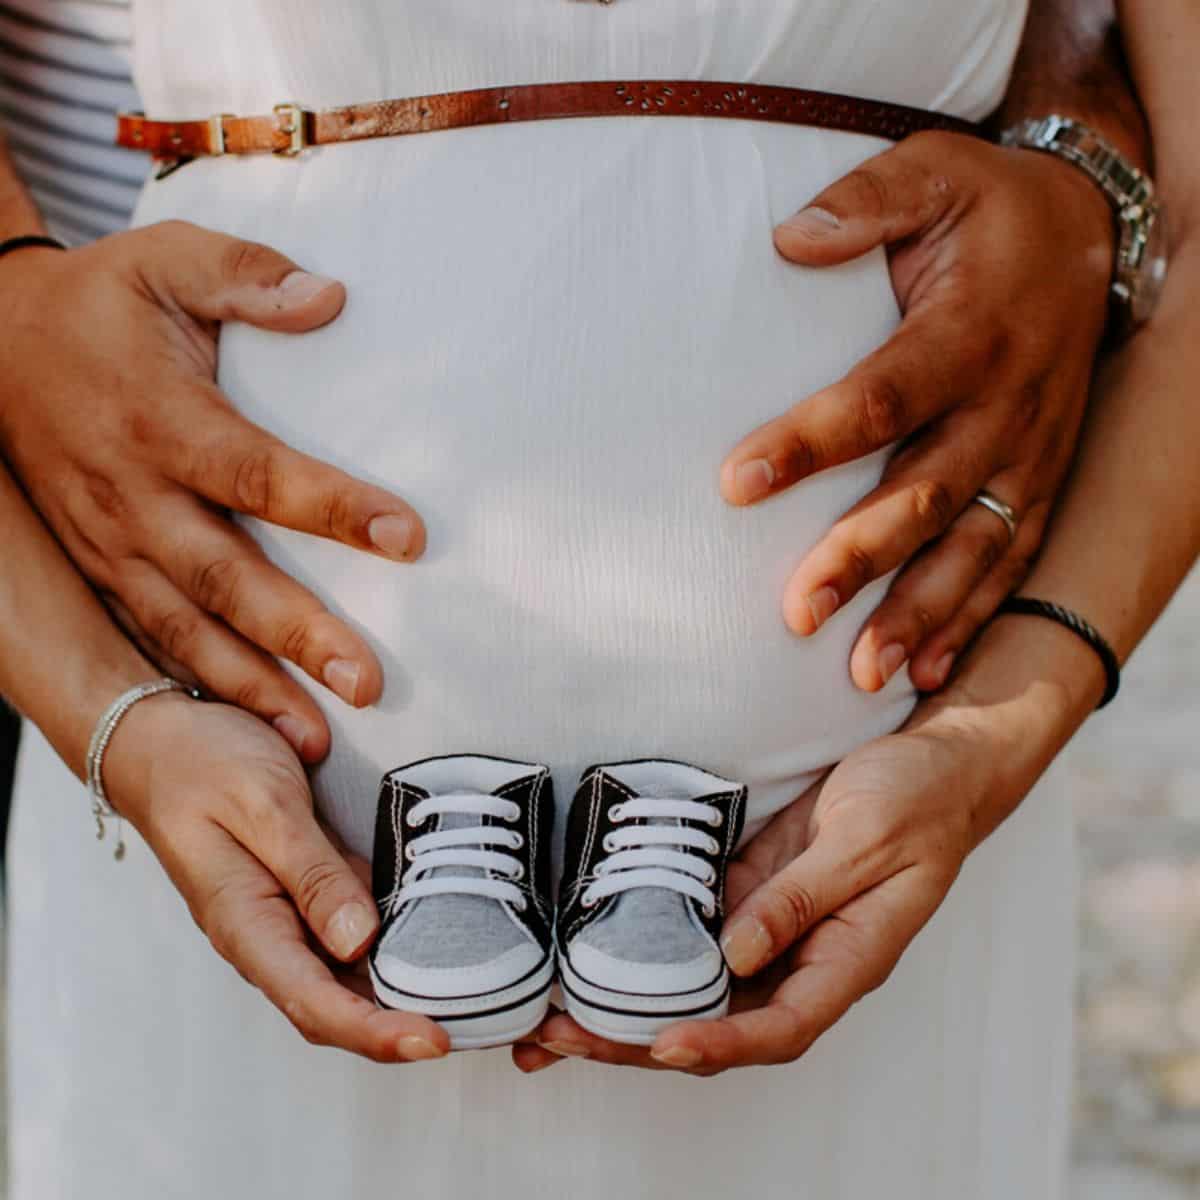 photo showing mother and father's hands; the father is holding the pregnant belly and the mother is holding baby shoes in front of her stomach